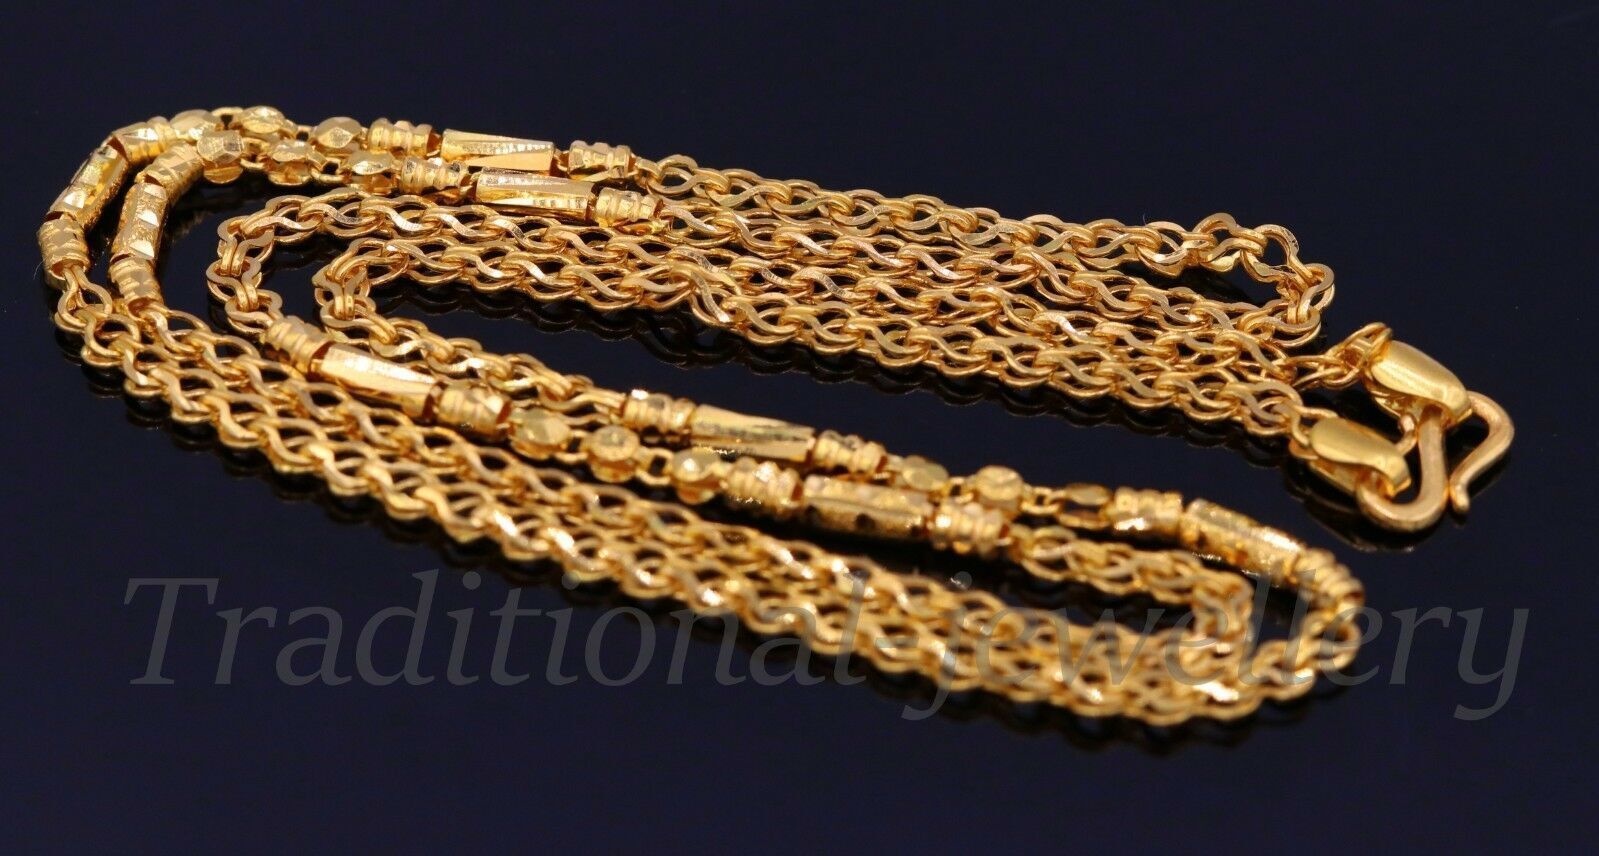 Primary image for 22 Kt Yellow Fancy Link Chain With Hallmark Sign Necklace Diamond Cut Indian